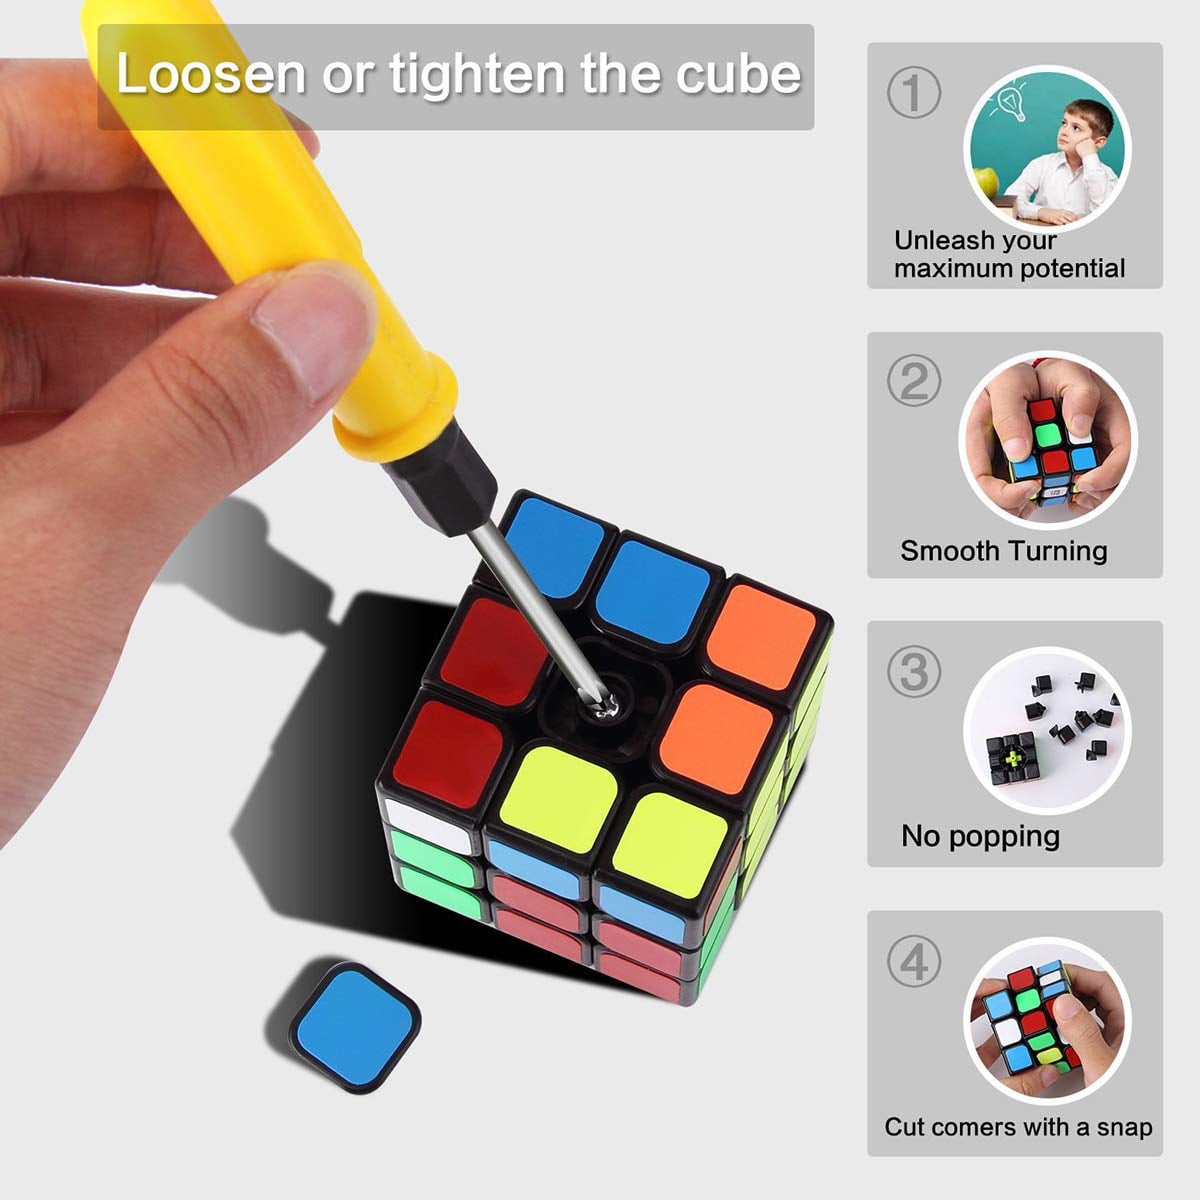 Details about   Rubiks Cube Puzzle Toy Brain Teaser 3x3x3 4x4x4 Magic Cube Pack Speed Cube